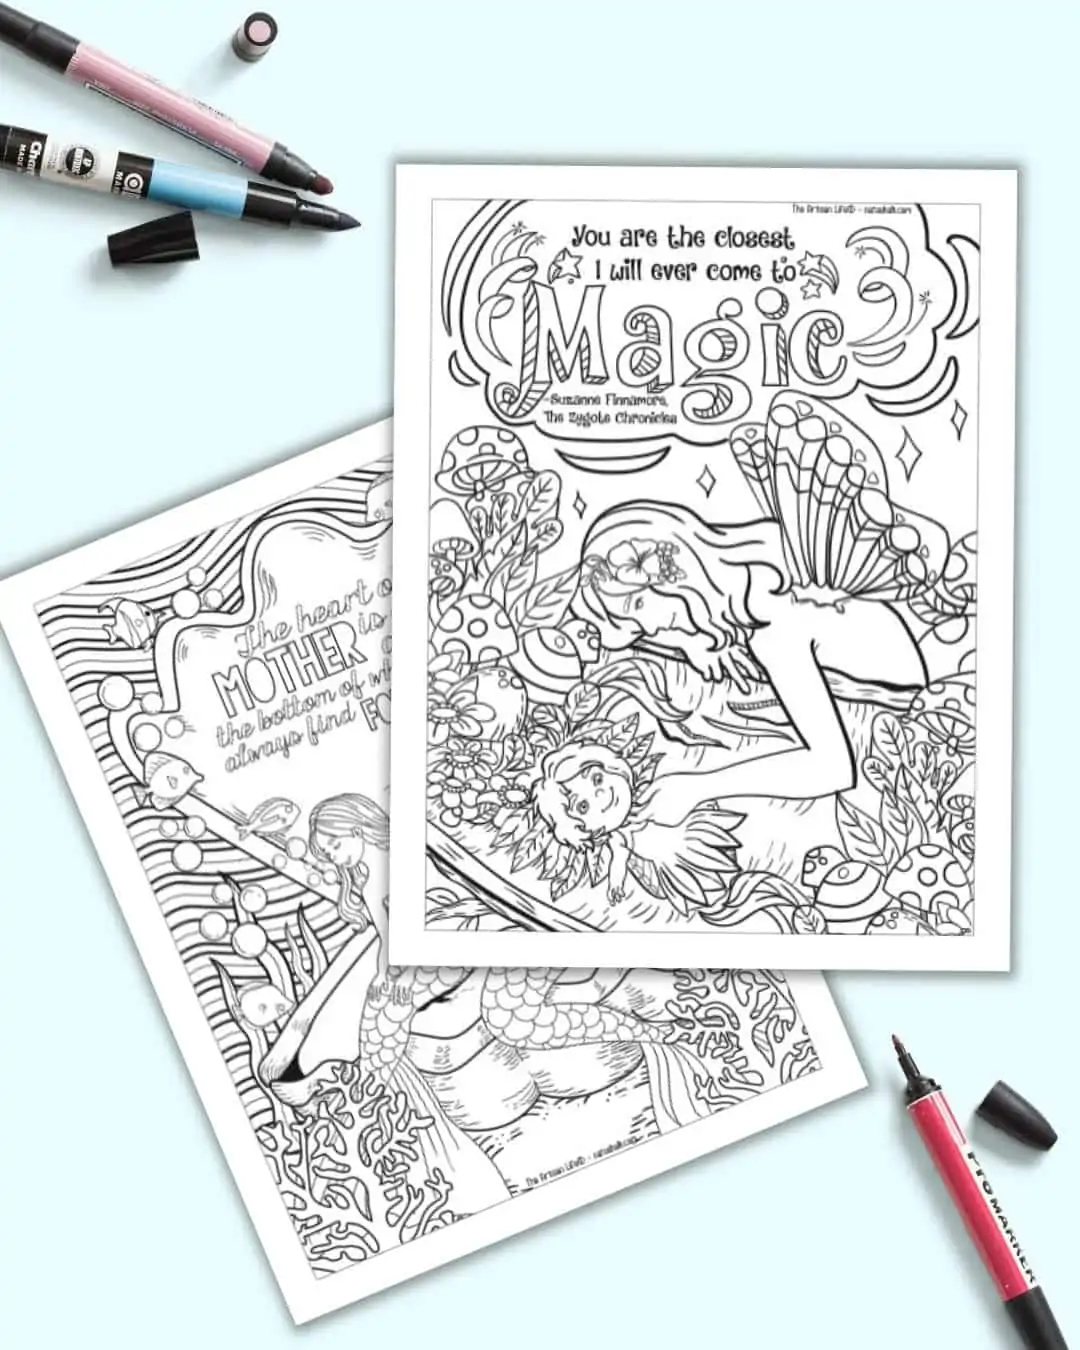 A preview of two printable coloring pages with quotes about motherhood. One page has a woman with her child. The other has an image of a penguin with its baby.